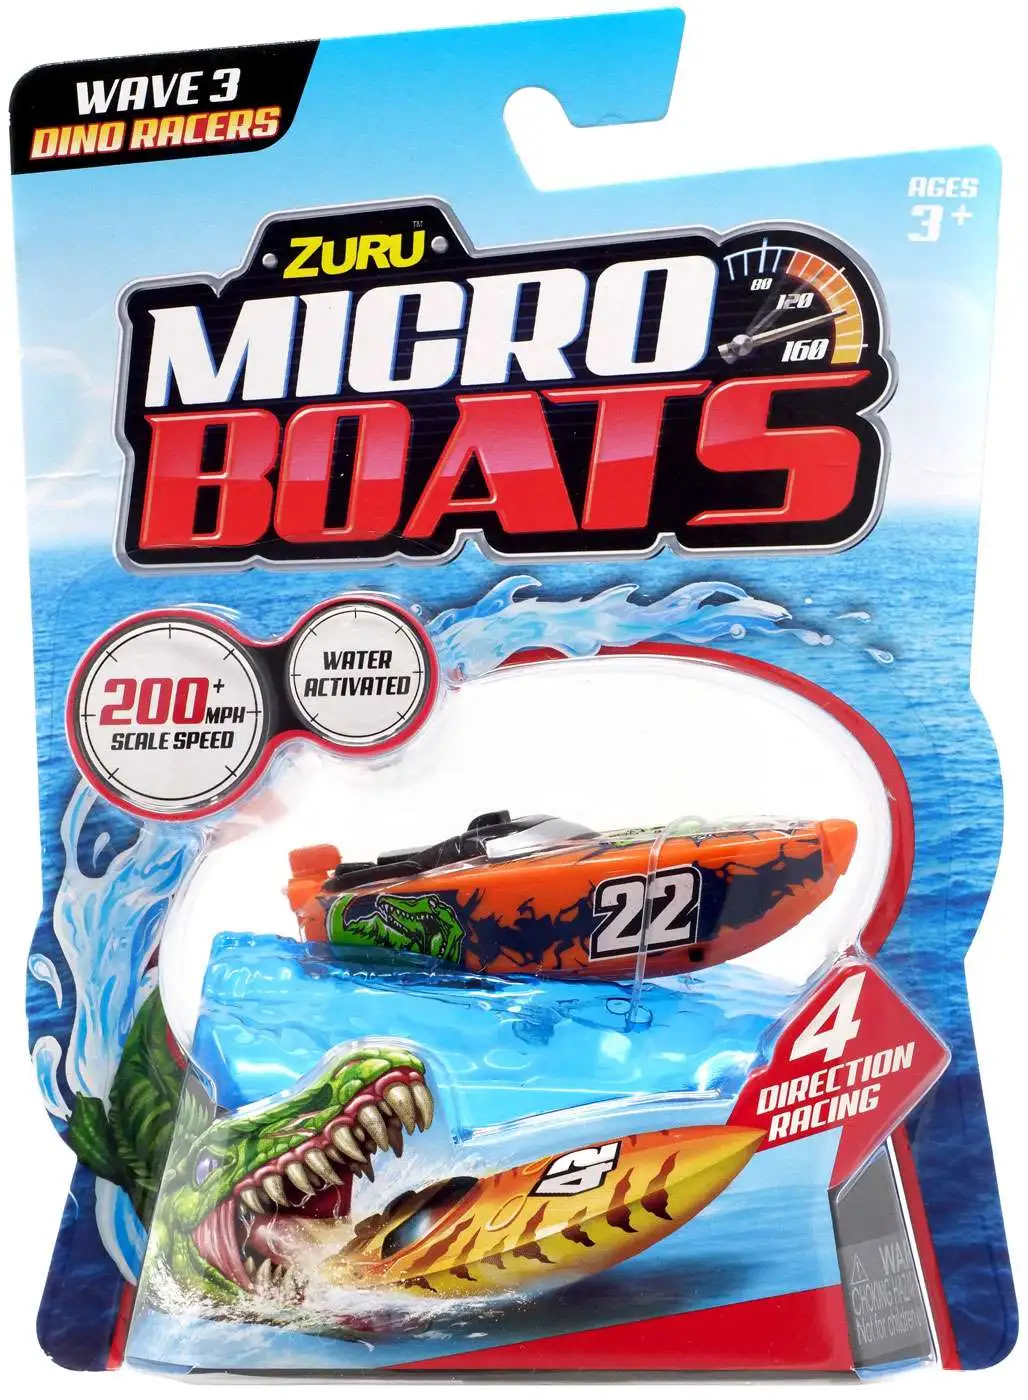 Micro Boats Wave 3 Dino Racers Series 3 by ZURU Fully Motorized 2 Pack Self-Steering Micro Toy Boat 25306 Multicolor 